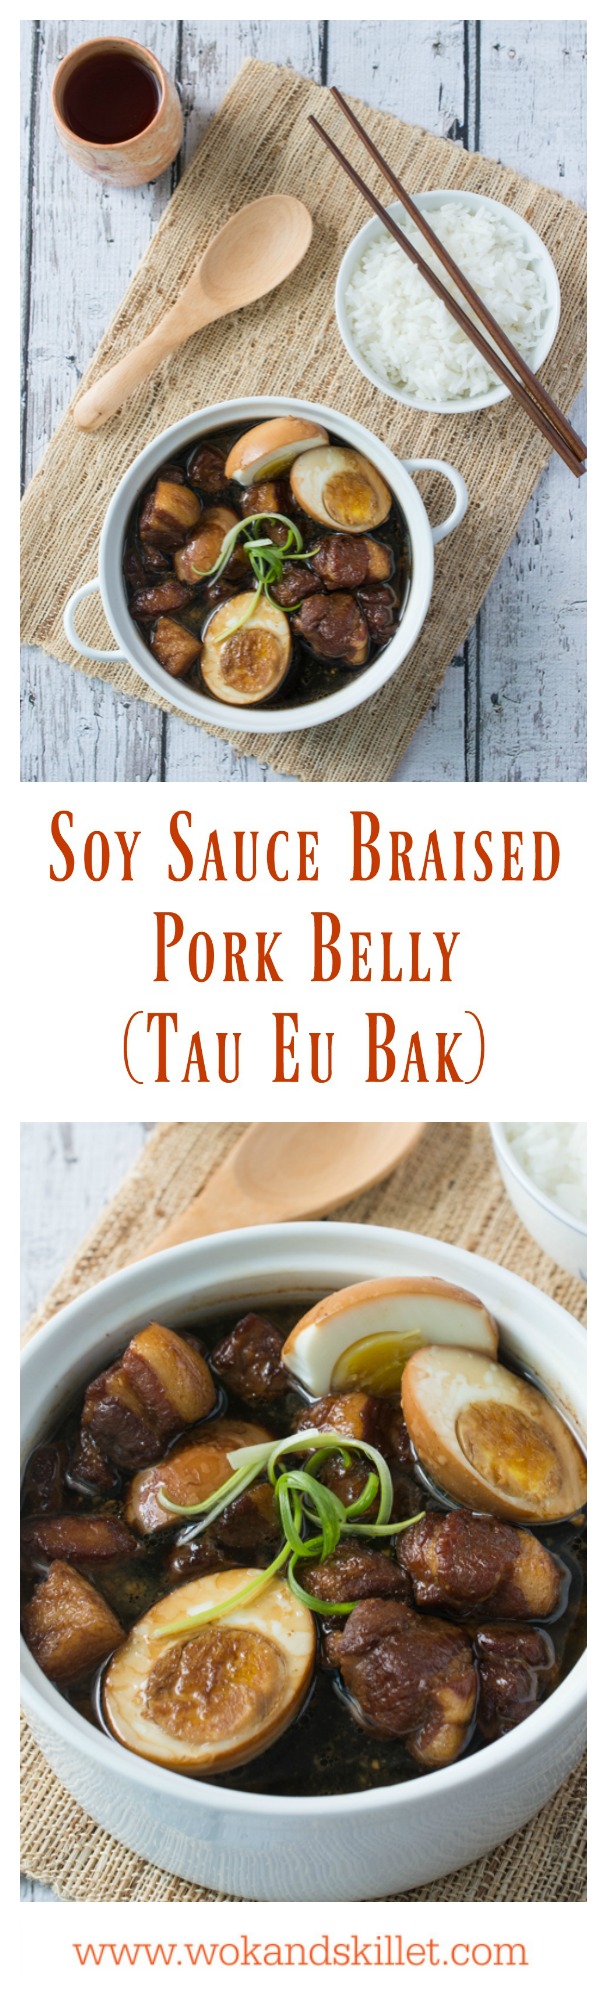 Tau Eu Bak (Soy Sauce Braised Pork Belly) is a popular and well-loved dish among the Malaysian Chinese community. Tender pork belly slowly braised in a light and slightly sweet soy sauce broth with a hint of garlic. 